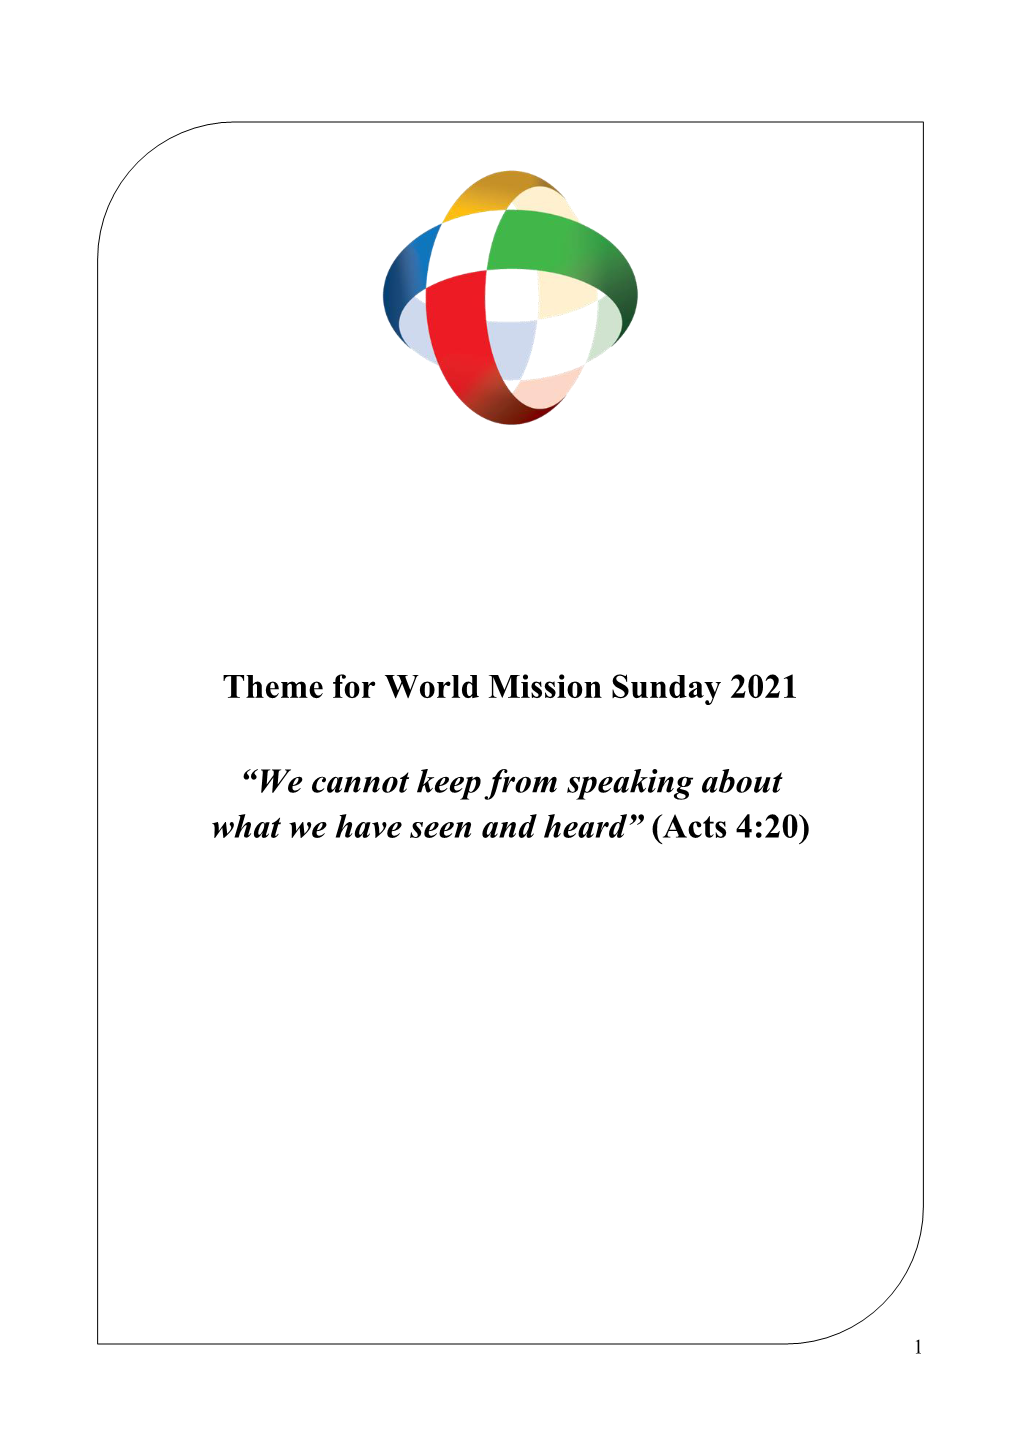 Theme for World Mission Sunday 2021 “We Cannot Keep From